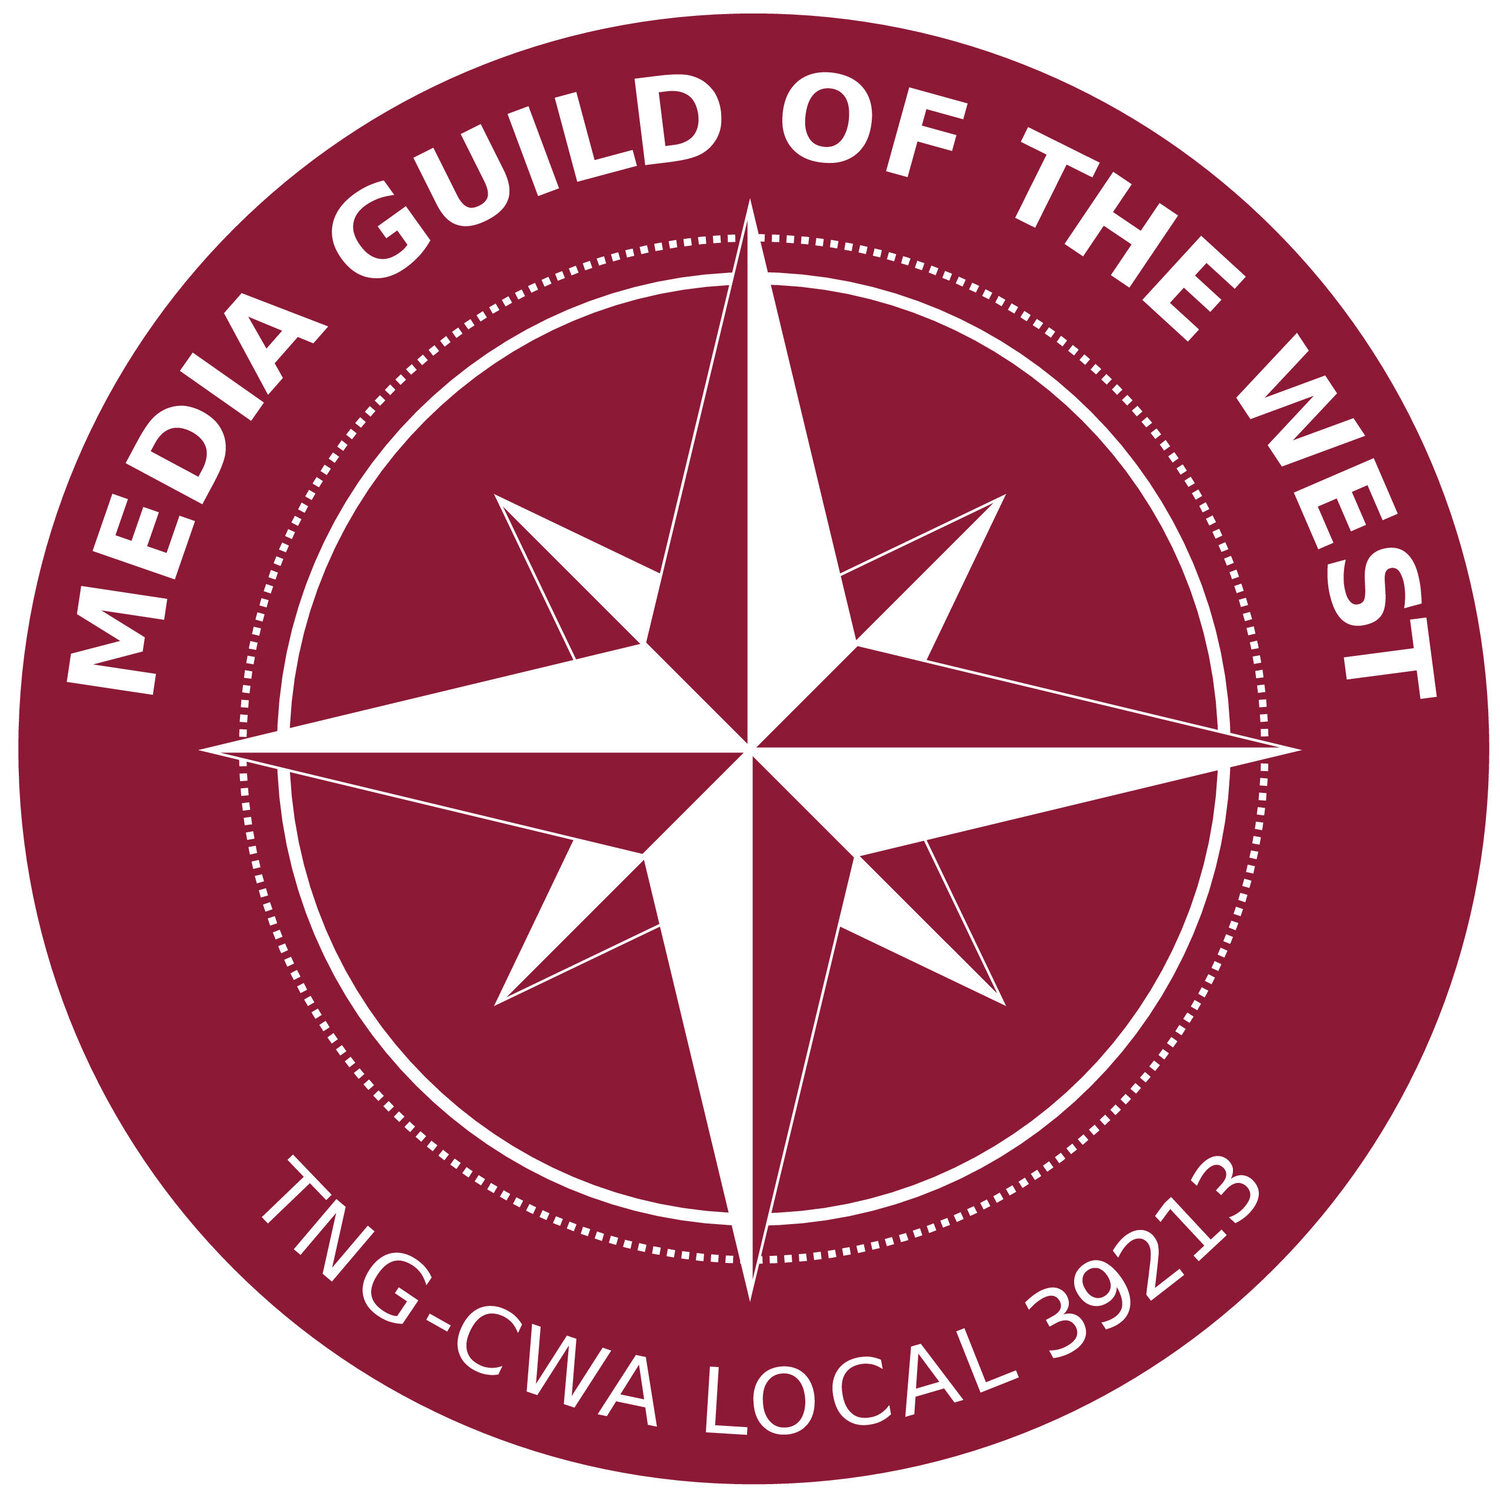 Media Guild of the West